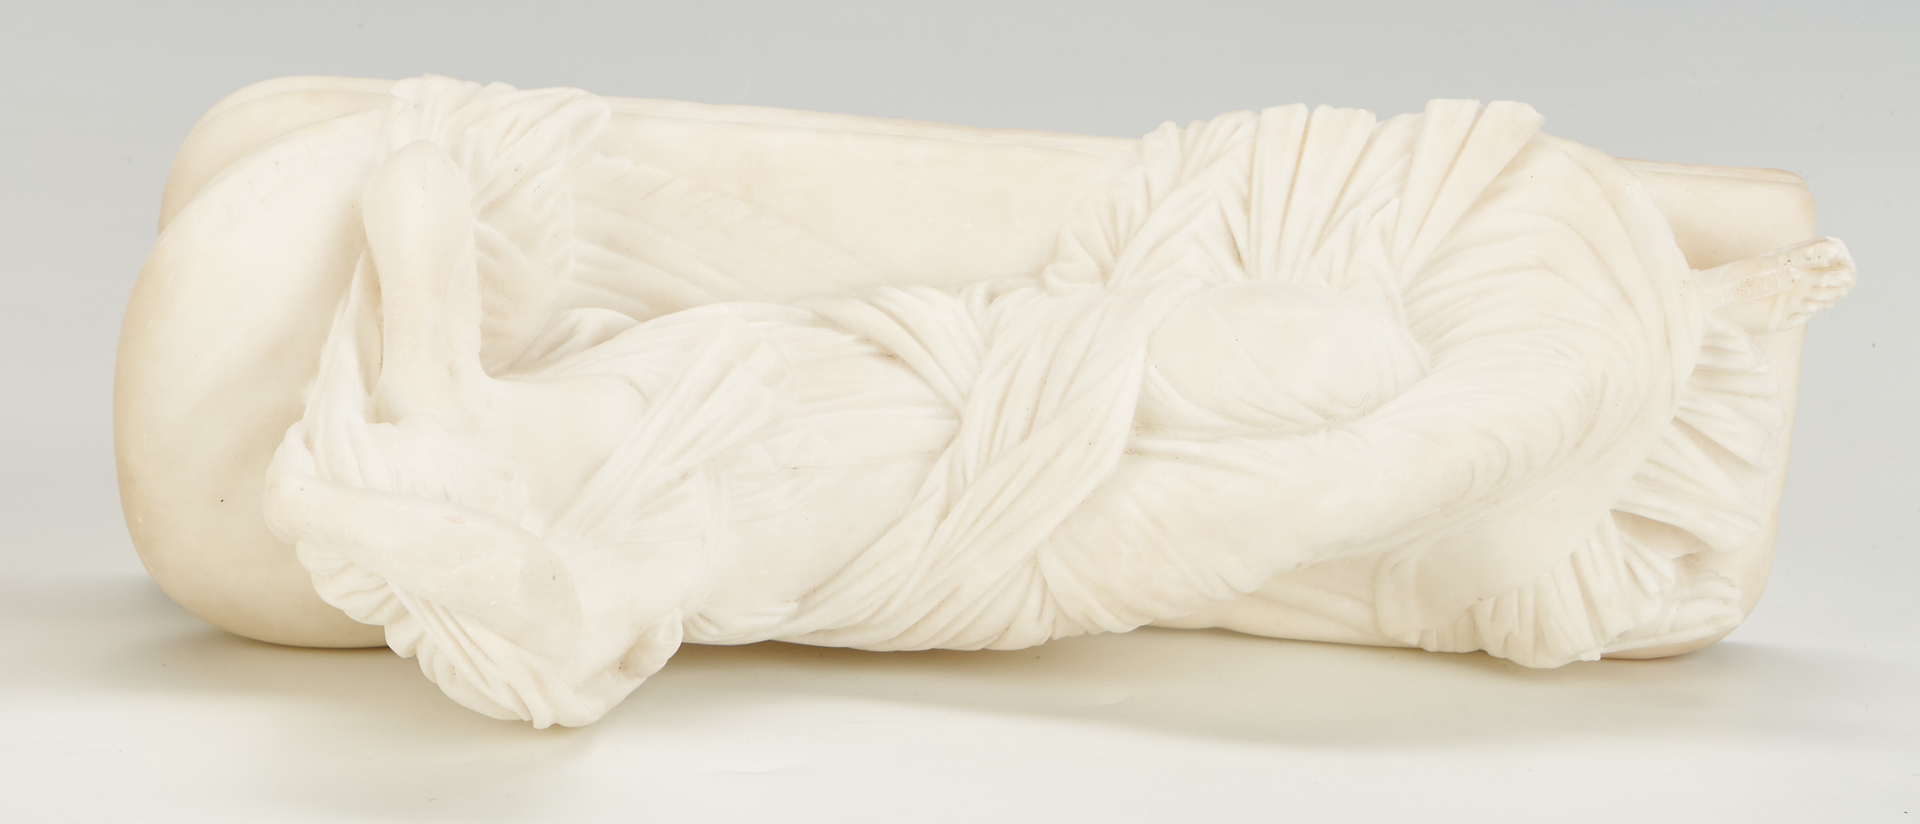 Lot 161: European Marble Sculpture of a Reclining Woman, after Antonio Canova